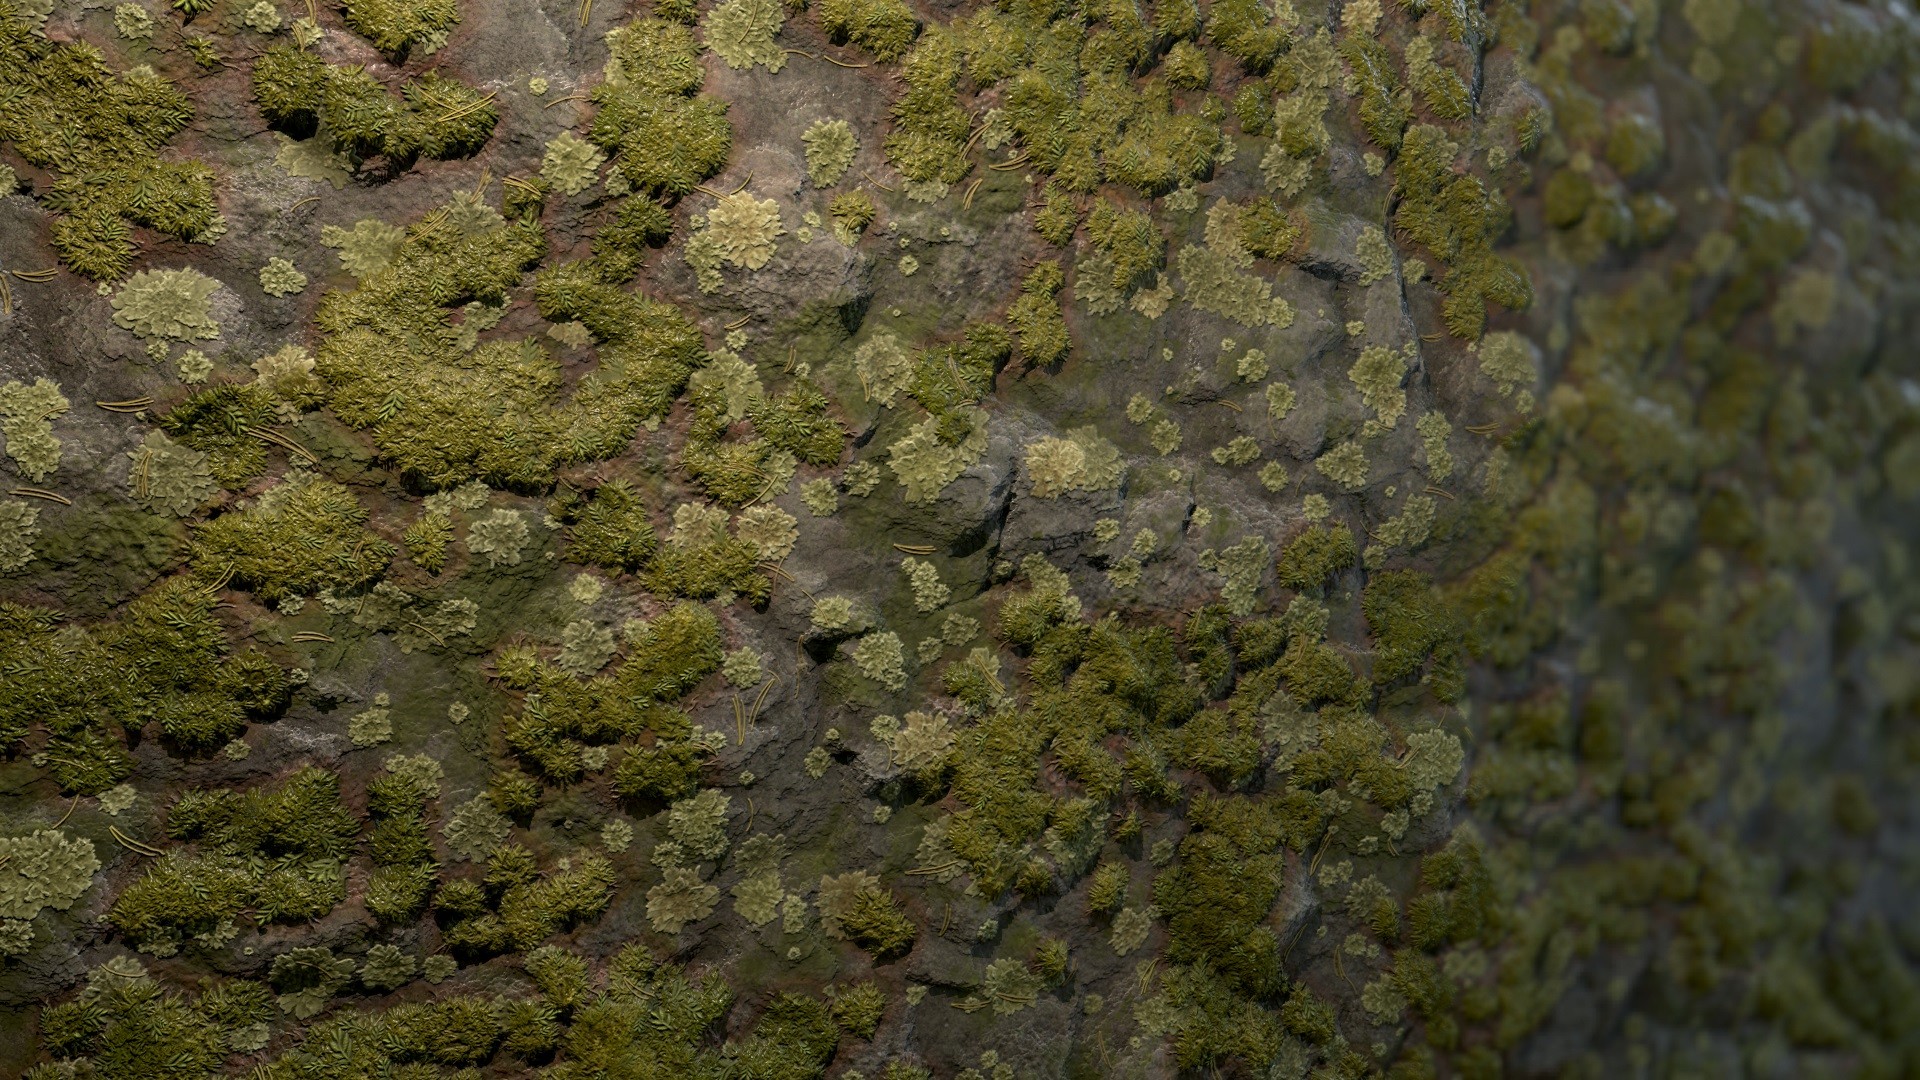 Mossy Rock Substance.